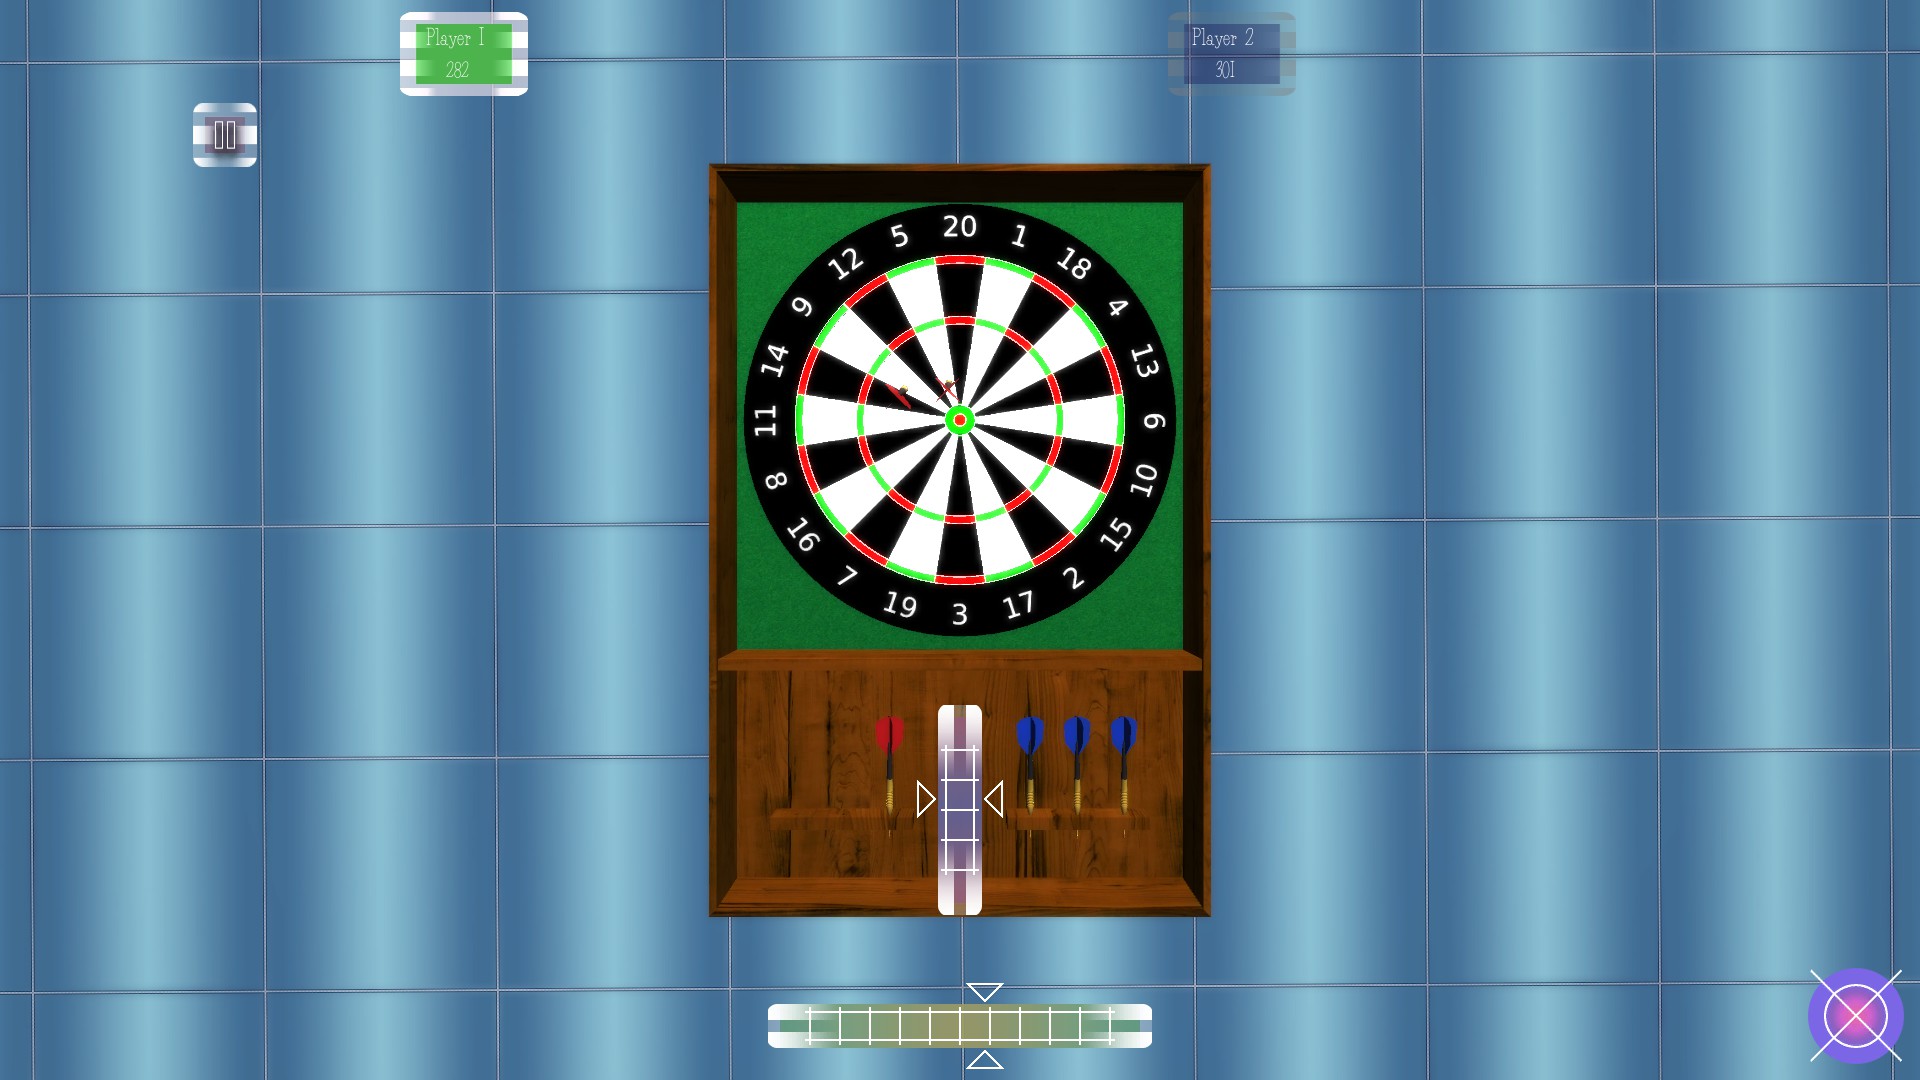 Darts and Friends on Steam